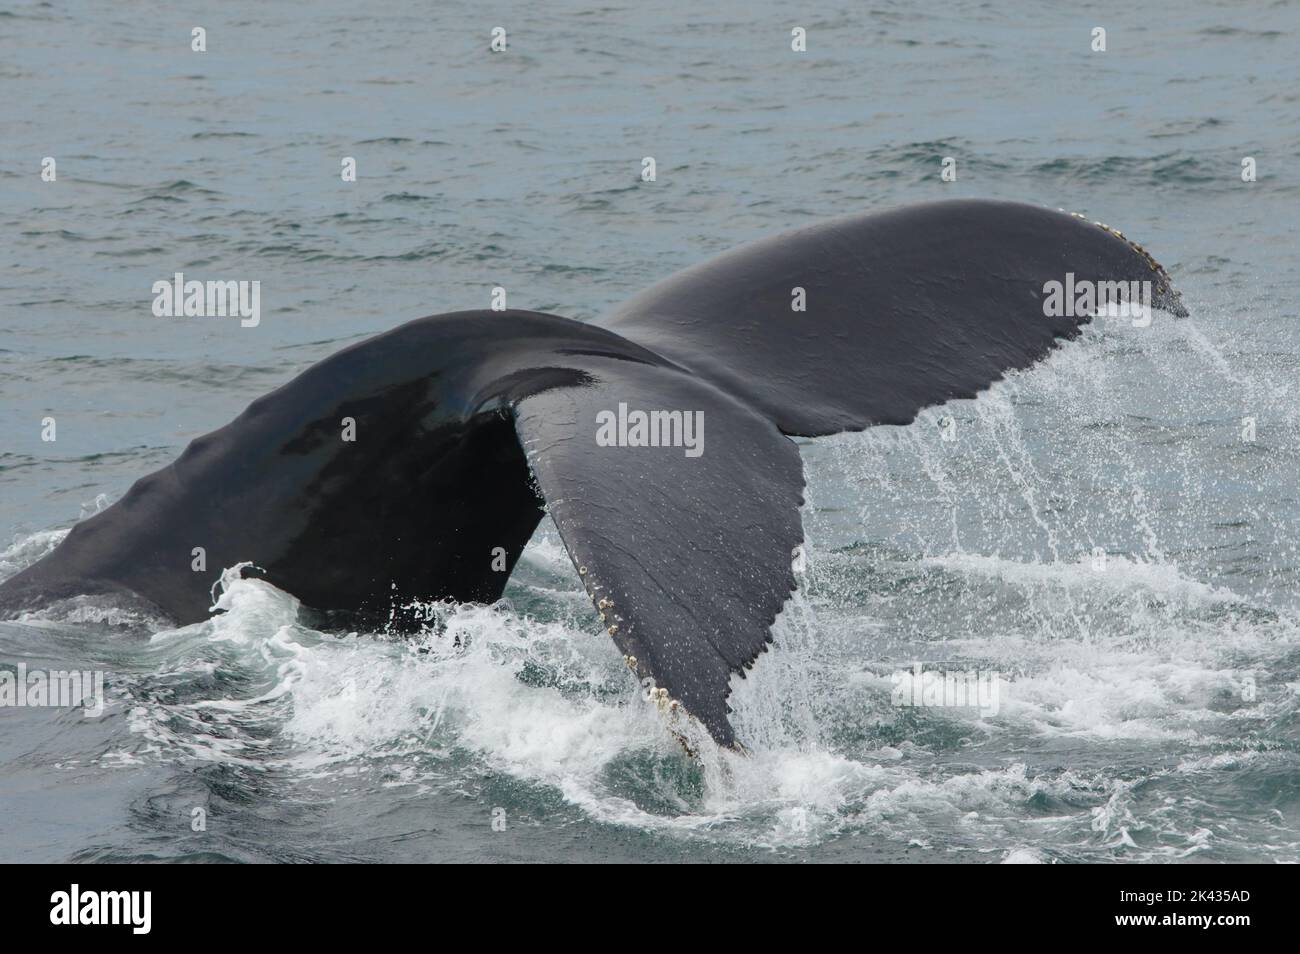 A humpback whale (Megaptera novaeangliae) begins its dive by lifting its fluke out of the water off the coast of Provincetown, Massachusetts. Stock Photo